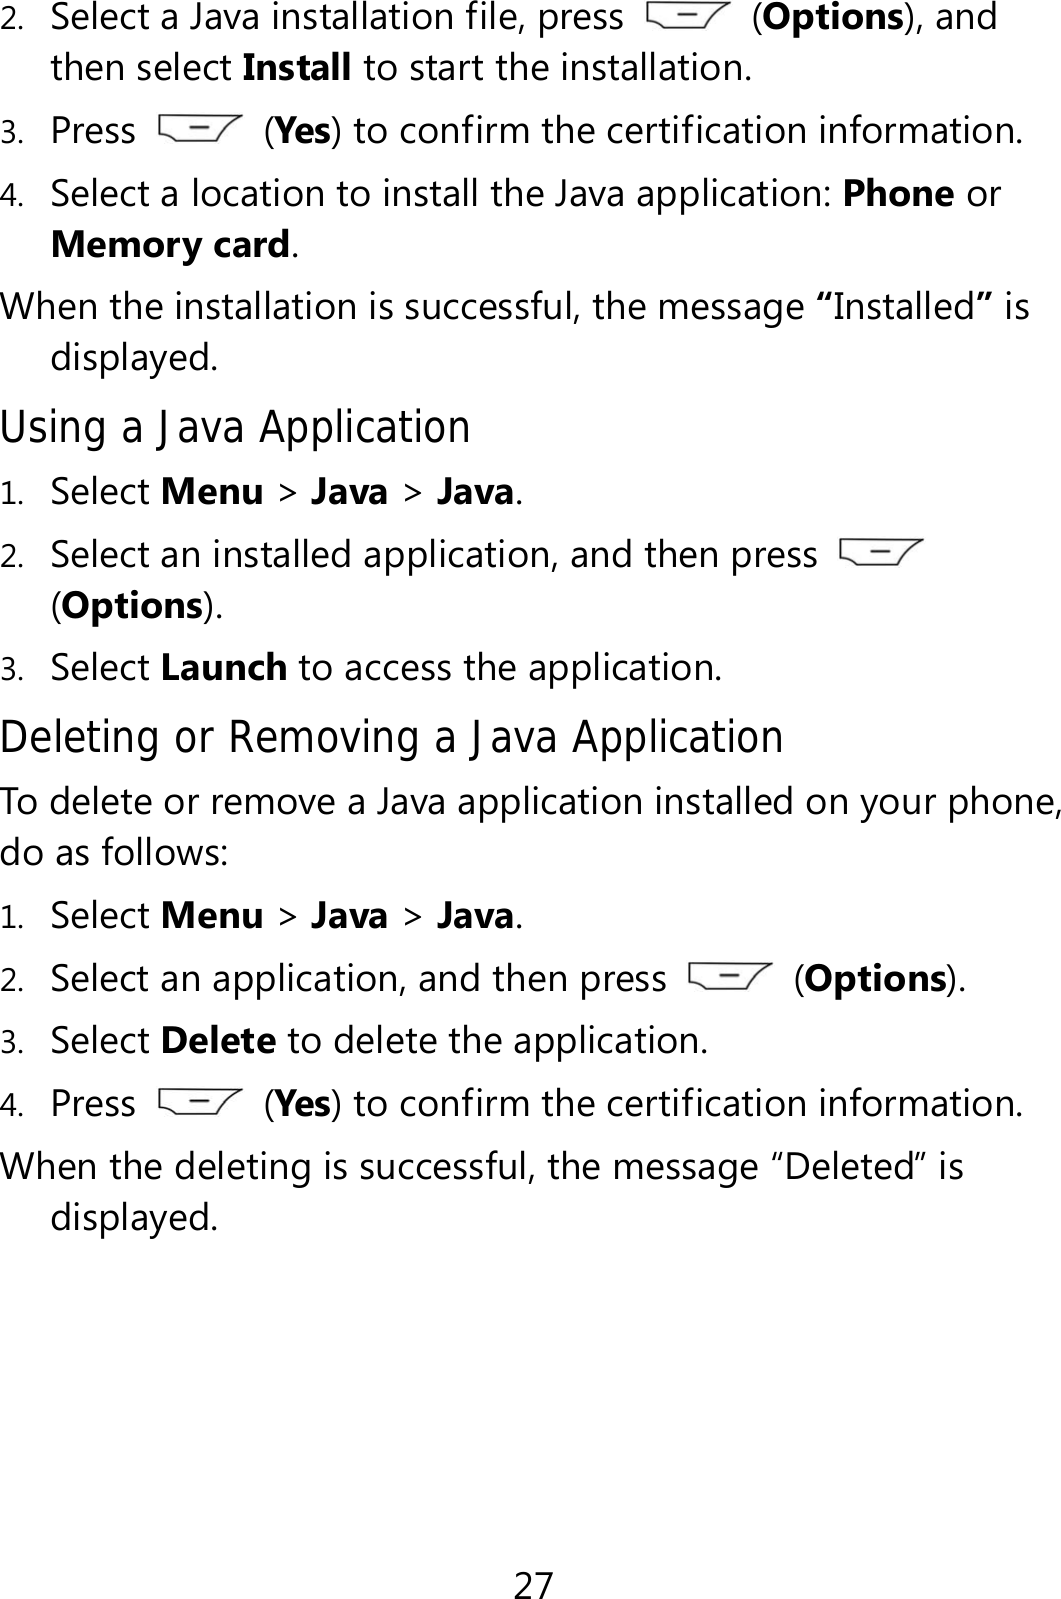 27 2. Select a Java installation file, press   (Options), and then select Install to start the installation. 3. Press   (Yes) to confirm the certification information. 4. Select a location to install the Java application: Phone or Memory card. When the installation is successful, the message “Installed” is displayed. Using a Java Application  1. Select Menu &gt; Java &gt; Java. 2. Select an installed application, and then press   (Options). 3. Select Launch to access the application. Deleting or Removing a Java Application To delete or remove a Java application installed on your phone, do as follows: 1. Select Menu &gt; Java &gt; Java. 2. Select an application, and then press   (Options). 3. Select Delete to delete the application. 4. Press   (Yes) to confirm the certification information. When the deleting is successful, the message “Deleted” is displayed. 